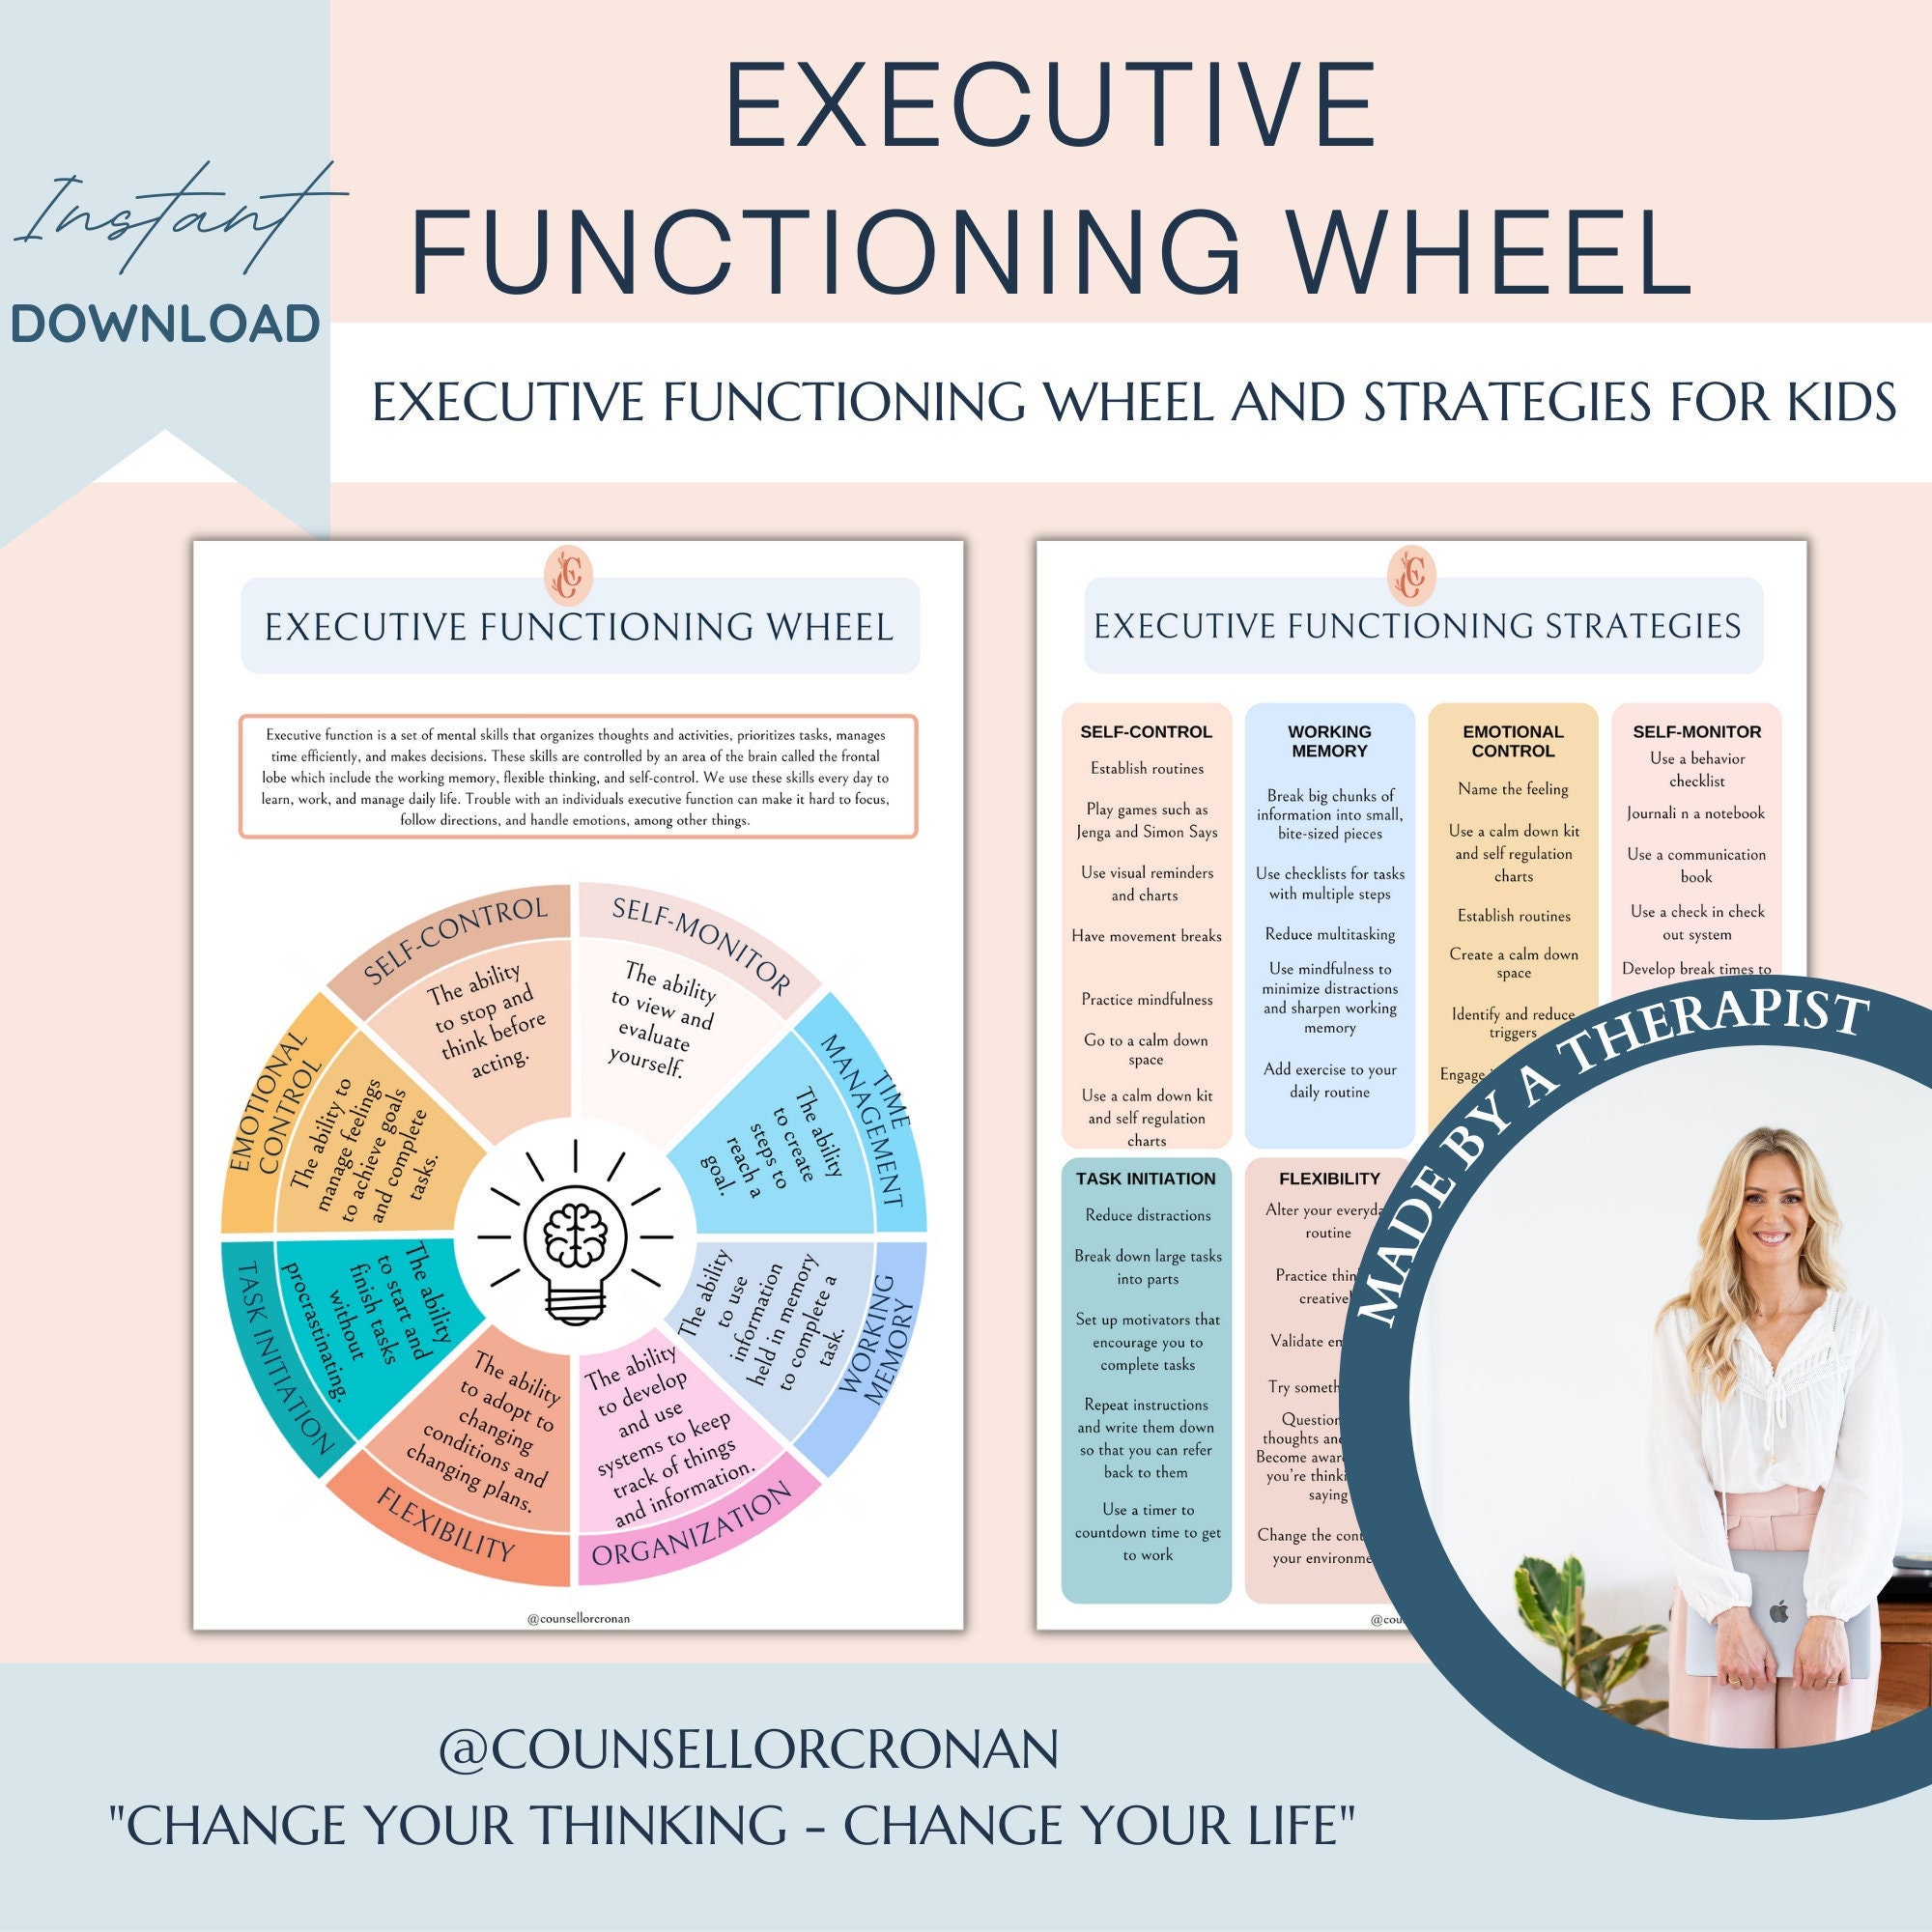 Executive functioning wheel and strategies, ADHD, Autism, coping skills, mental health, therapeutic aids, psychologist handouts, therapy CBT